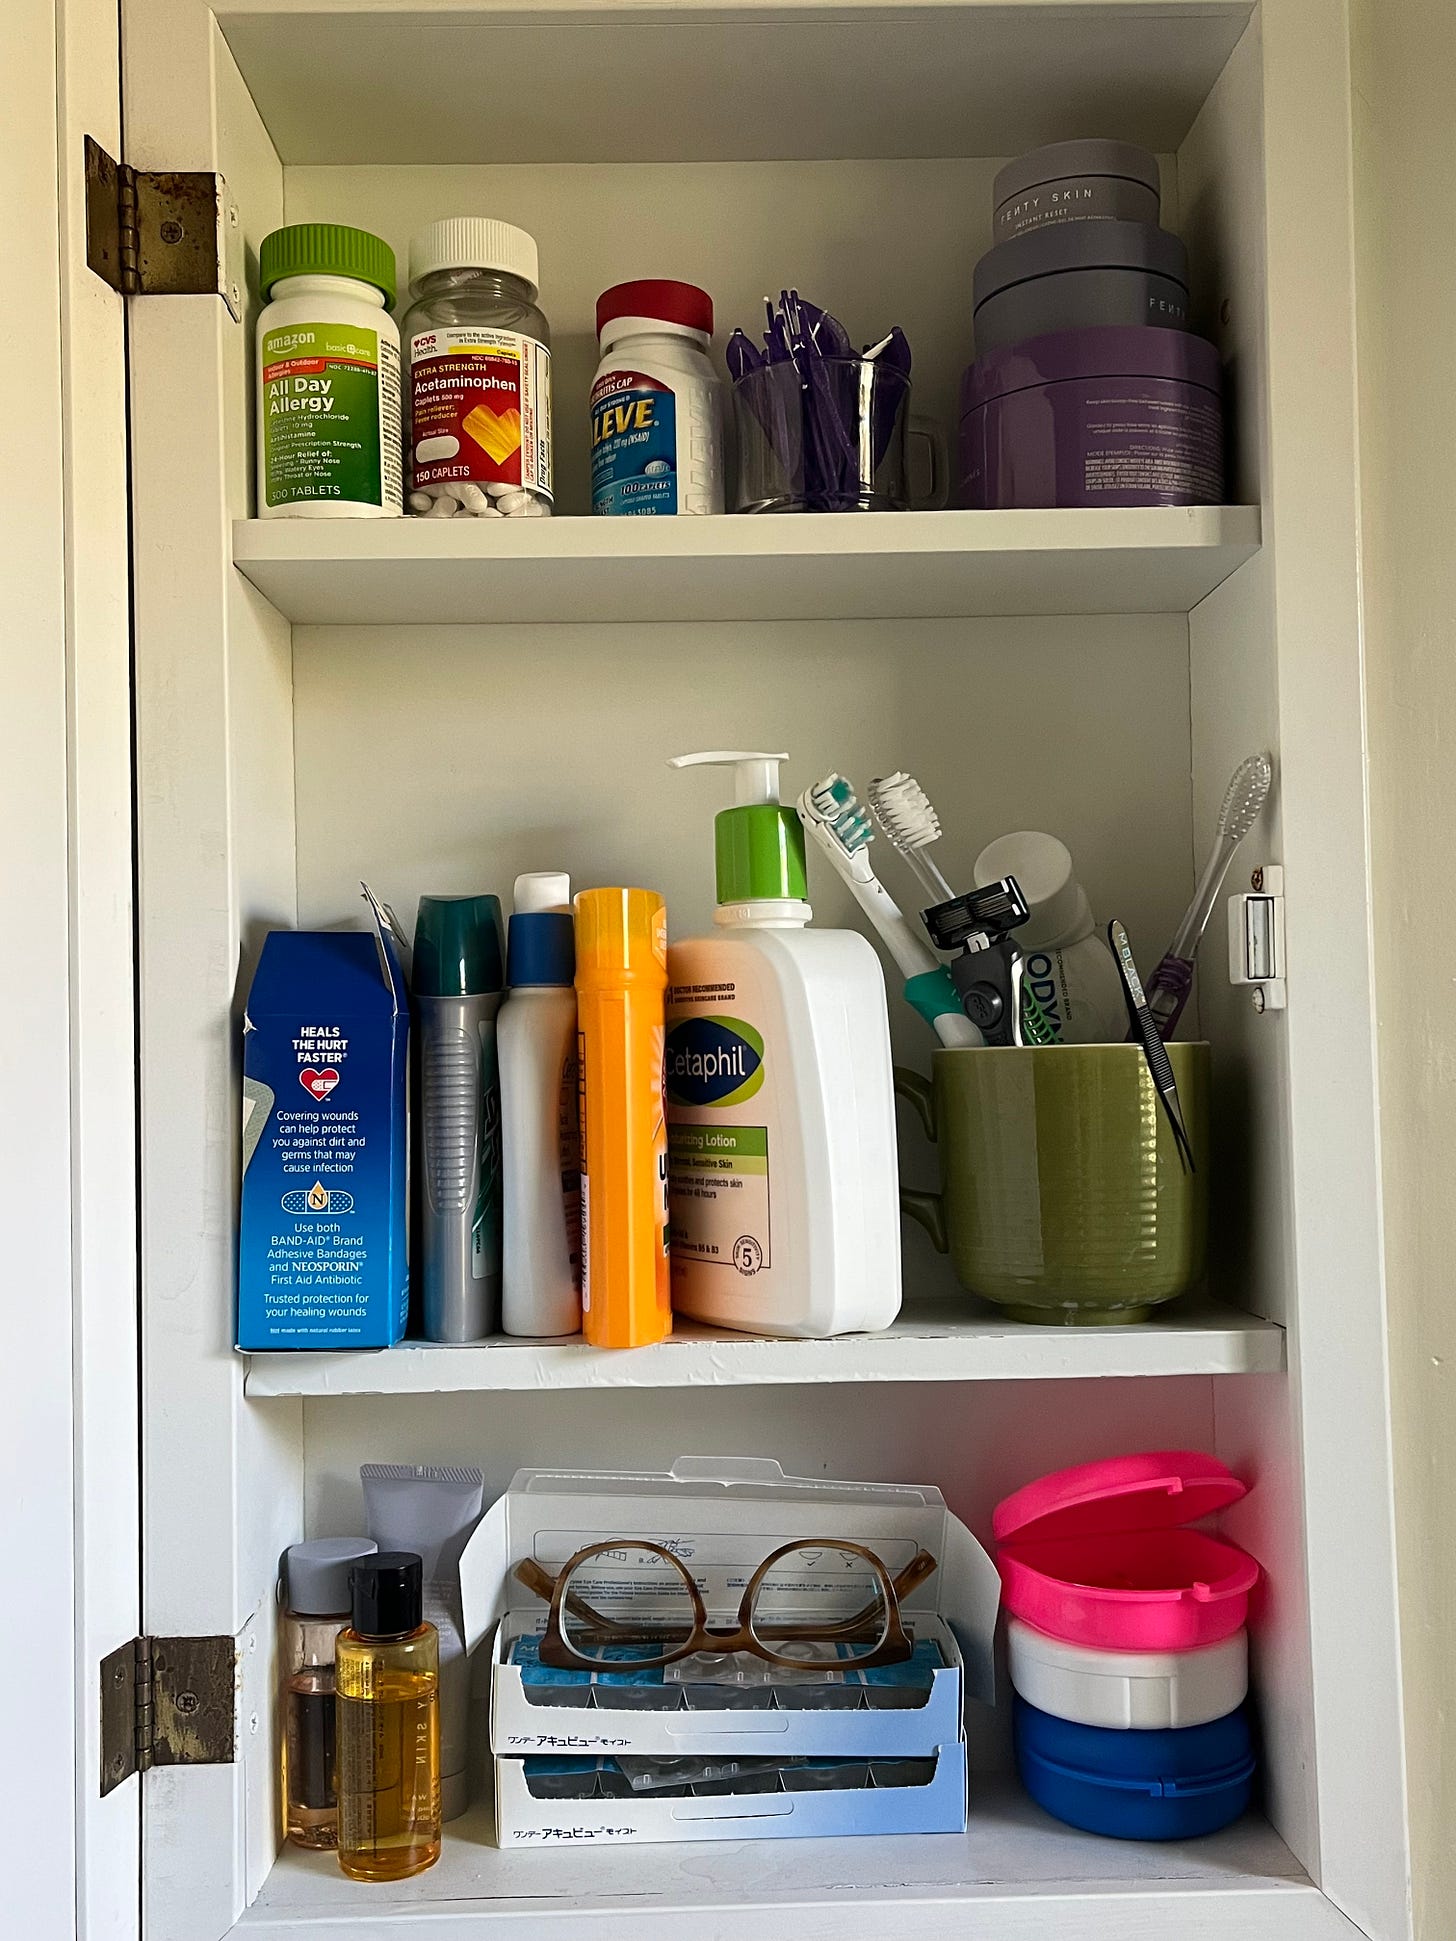 The contents of my medicine cabinet include an array of lotions, serums, deodorant, toothbrushes, retainers I don’t wear as often as I should, contact lenses, glasses, and pill bottles.